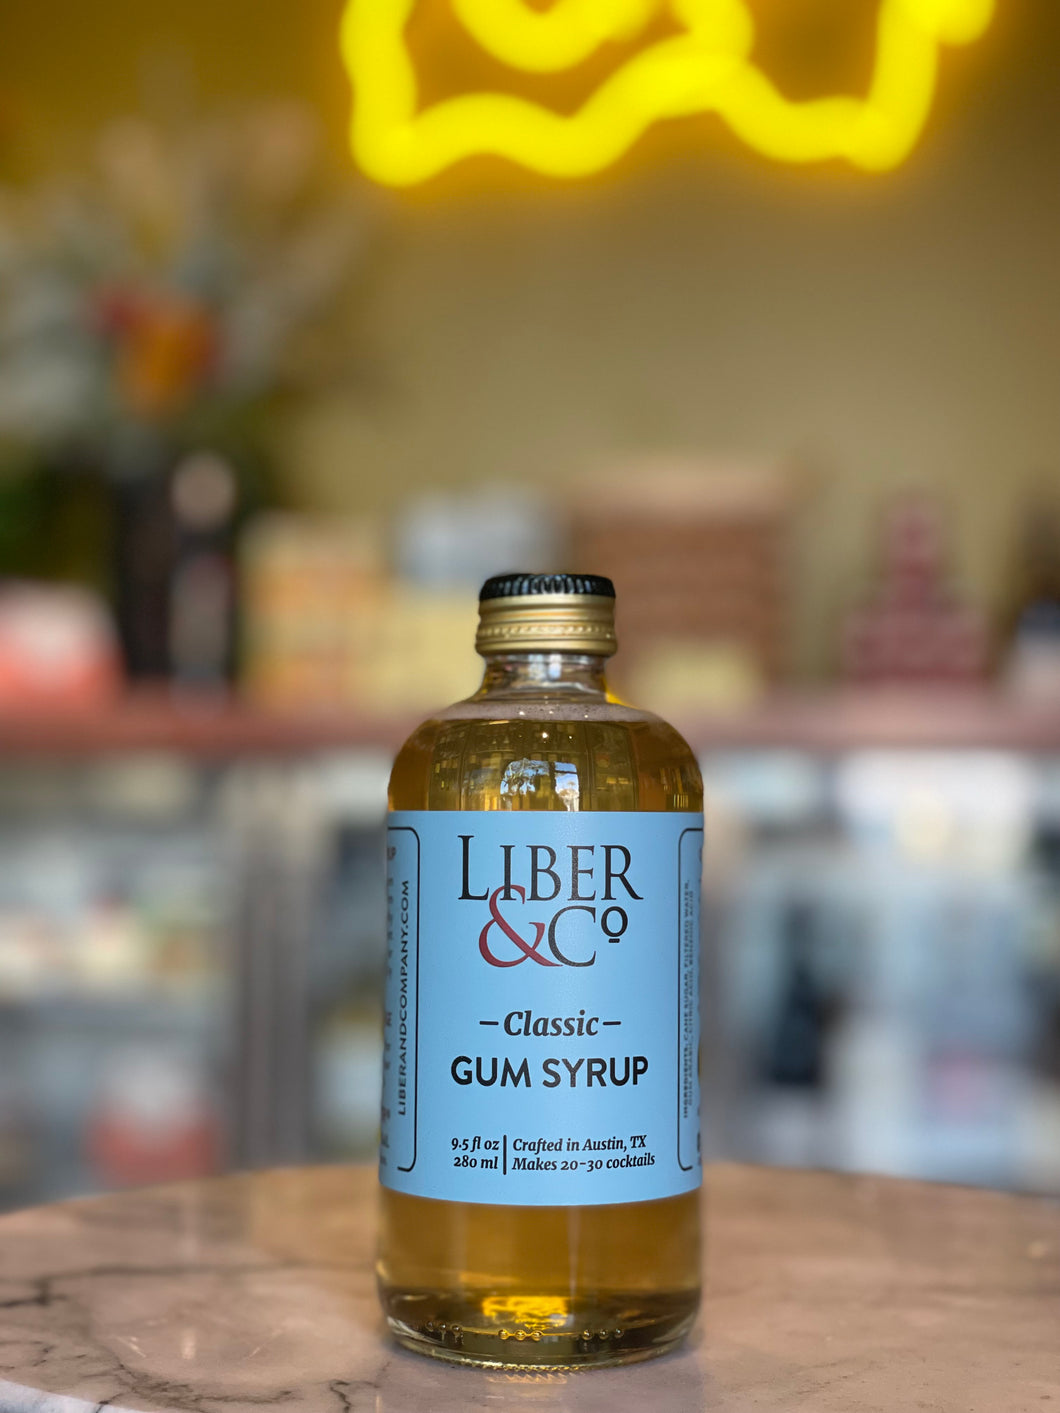 Liber & Co Classic Gum Syrup